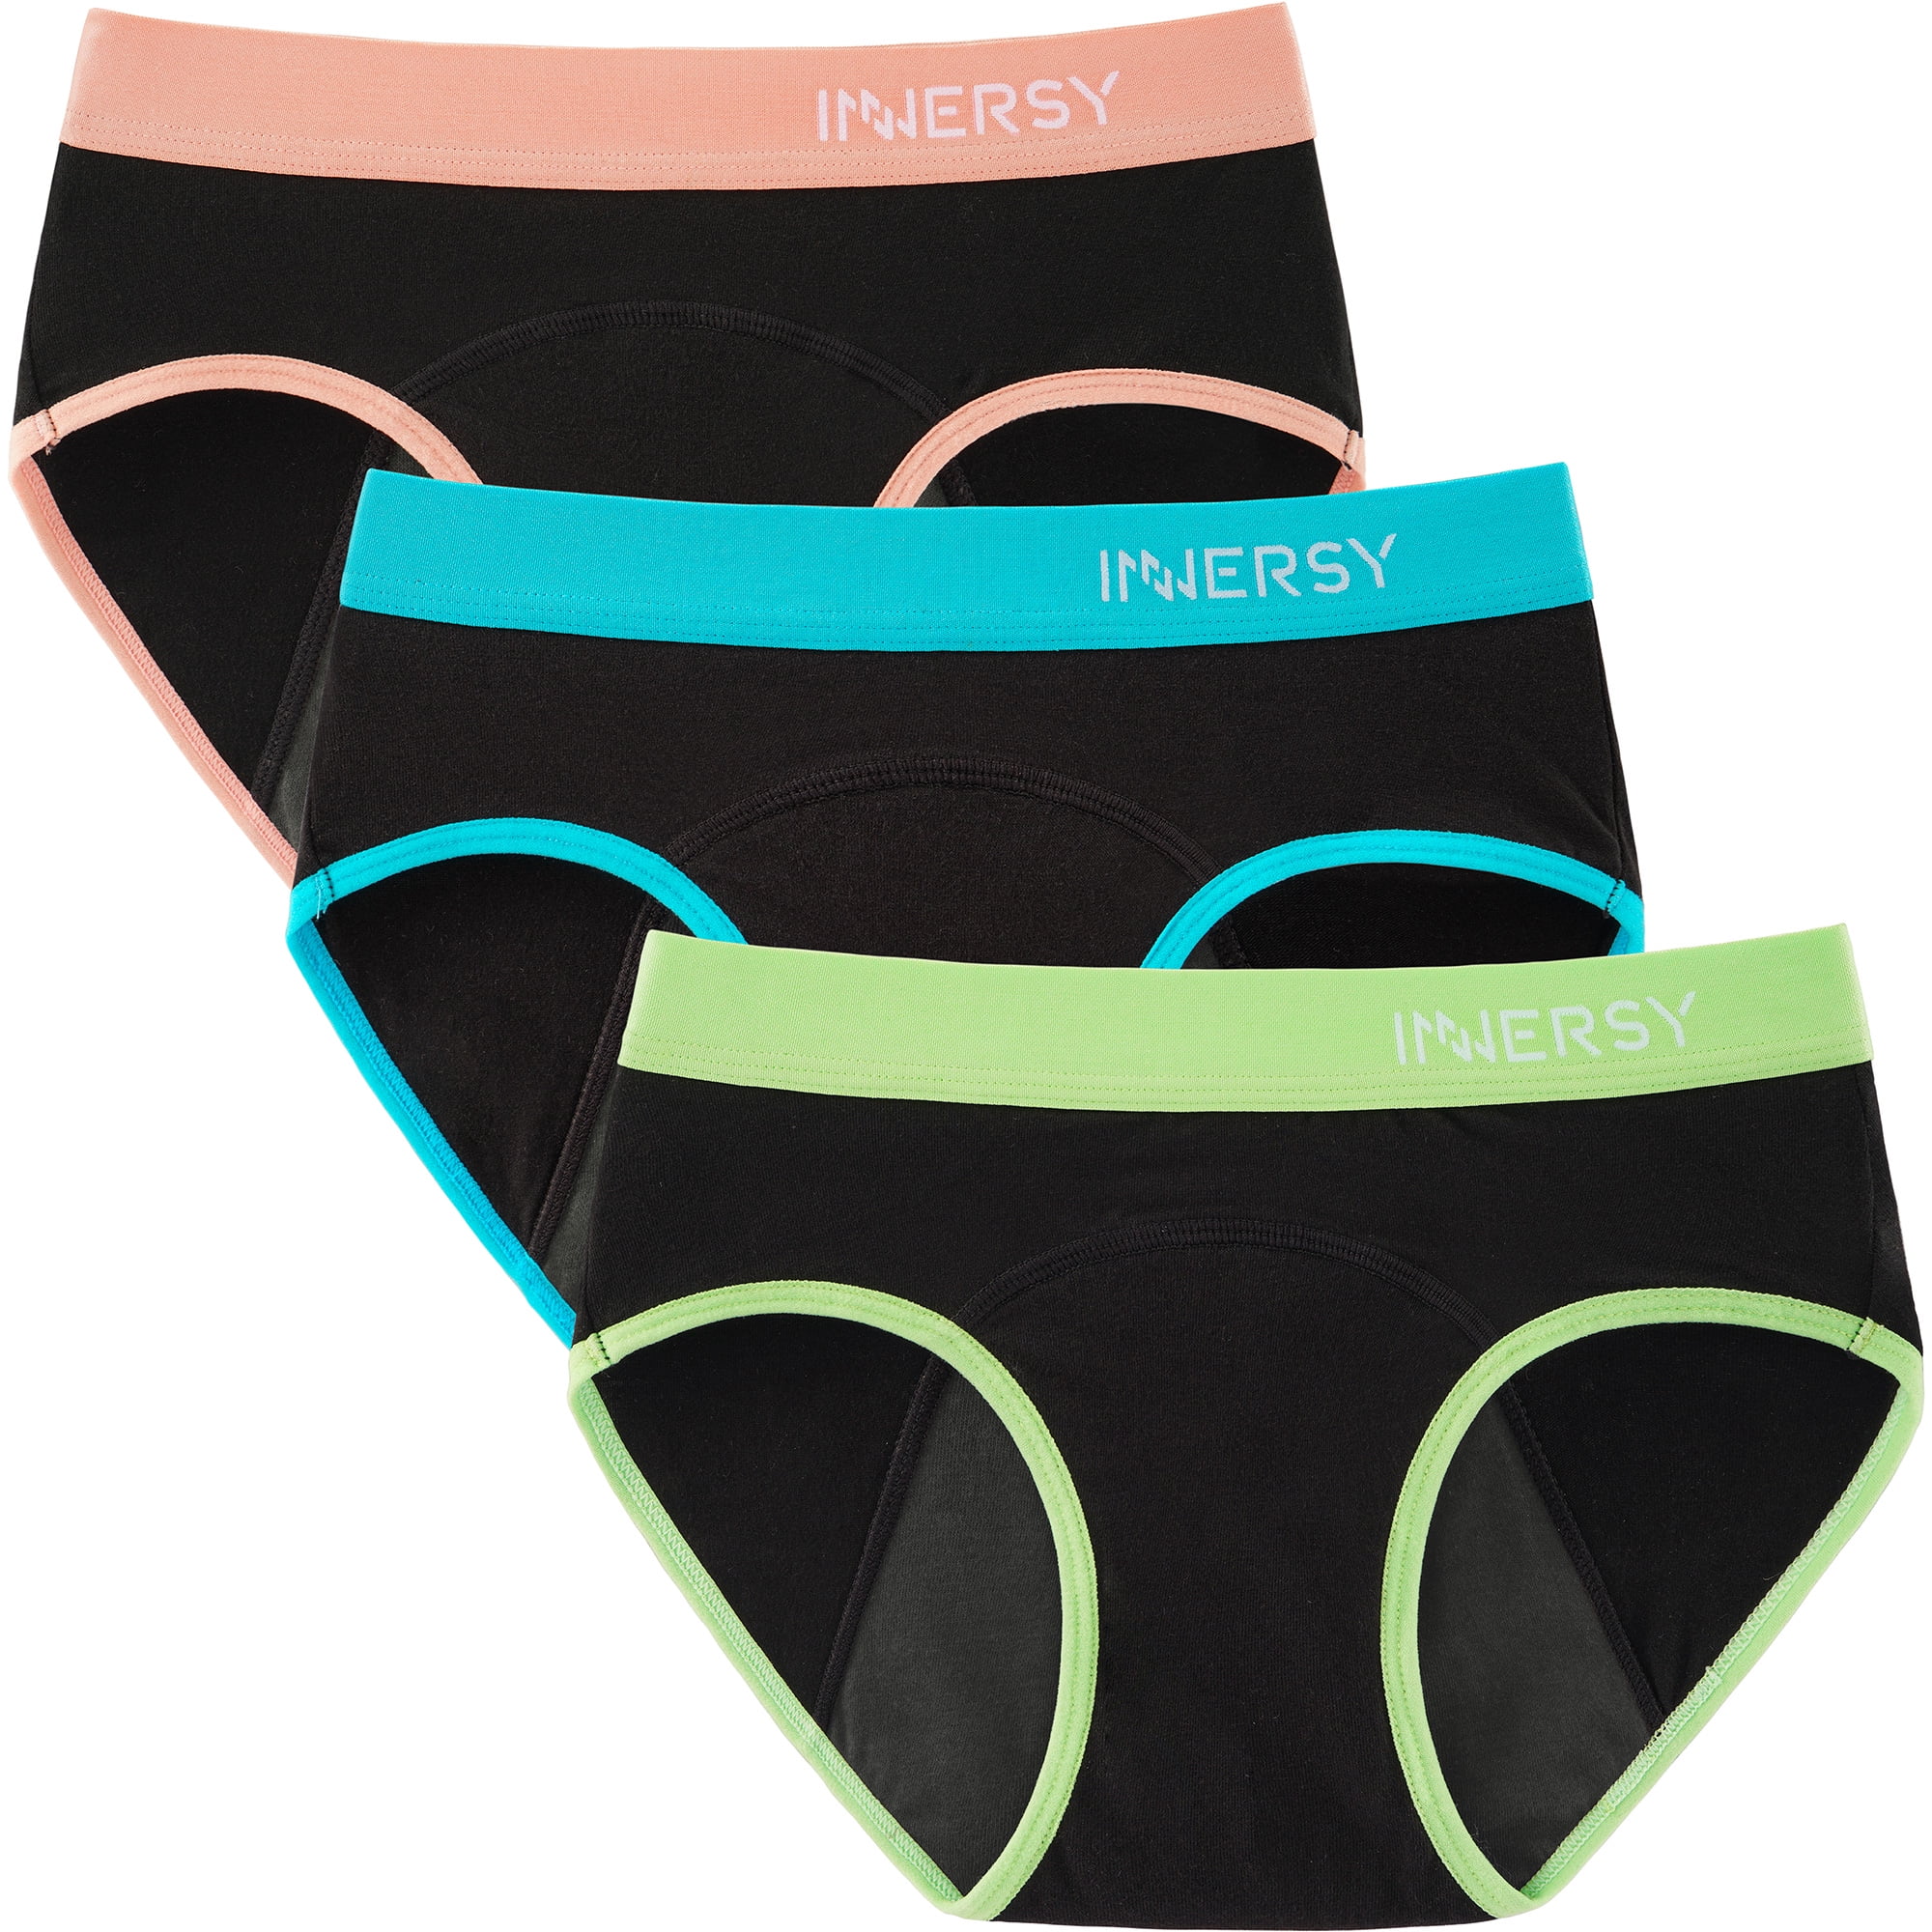  Neione Girls' Panties Period Underwear for Teens Junior  Menstrual Hipsters First Period Starter 3 Pack Fairy 9-10 Years: Clothing,  Shoes & Jewelry